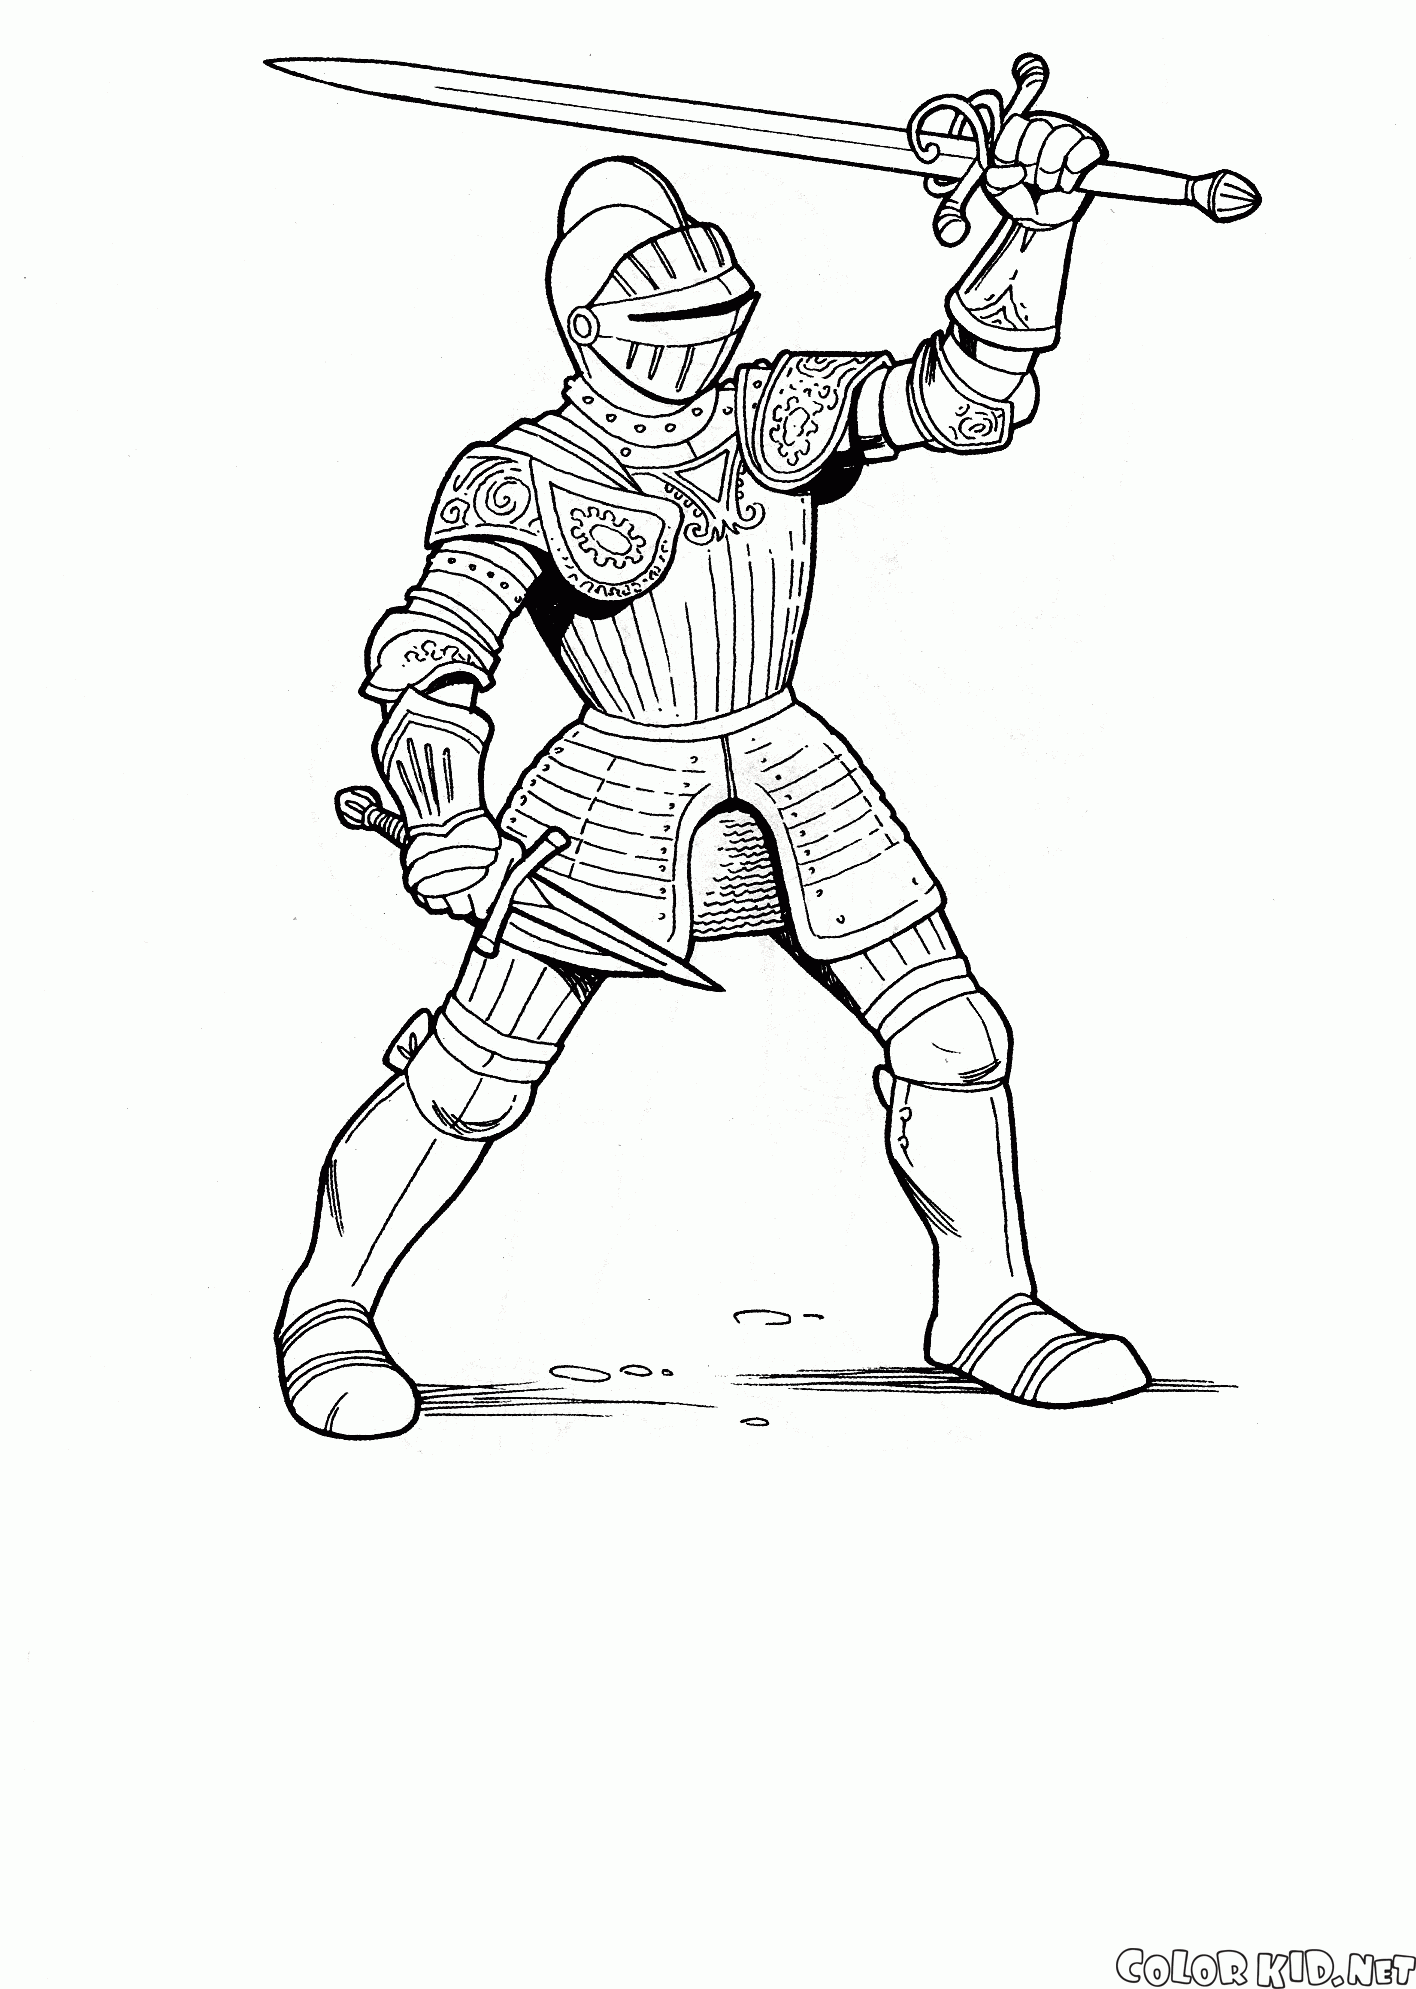 Coloring page - Knights armor